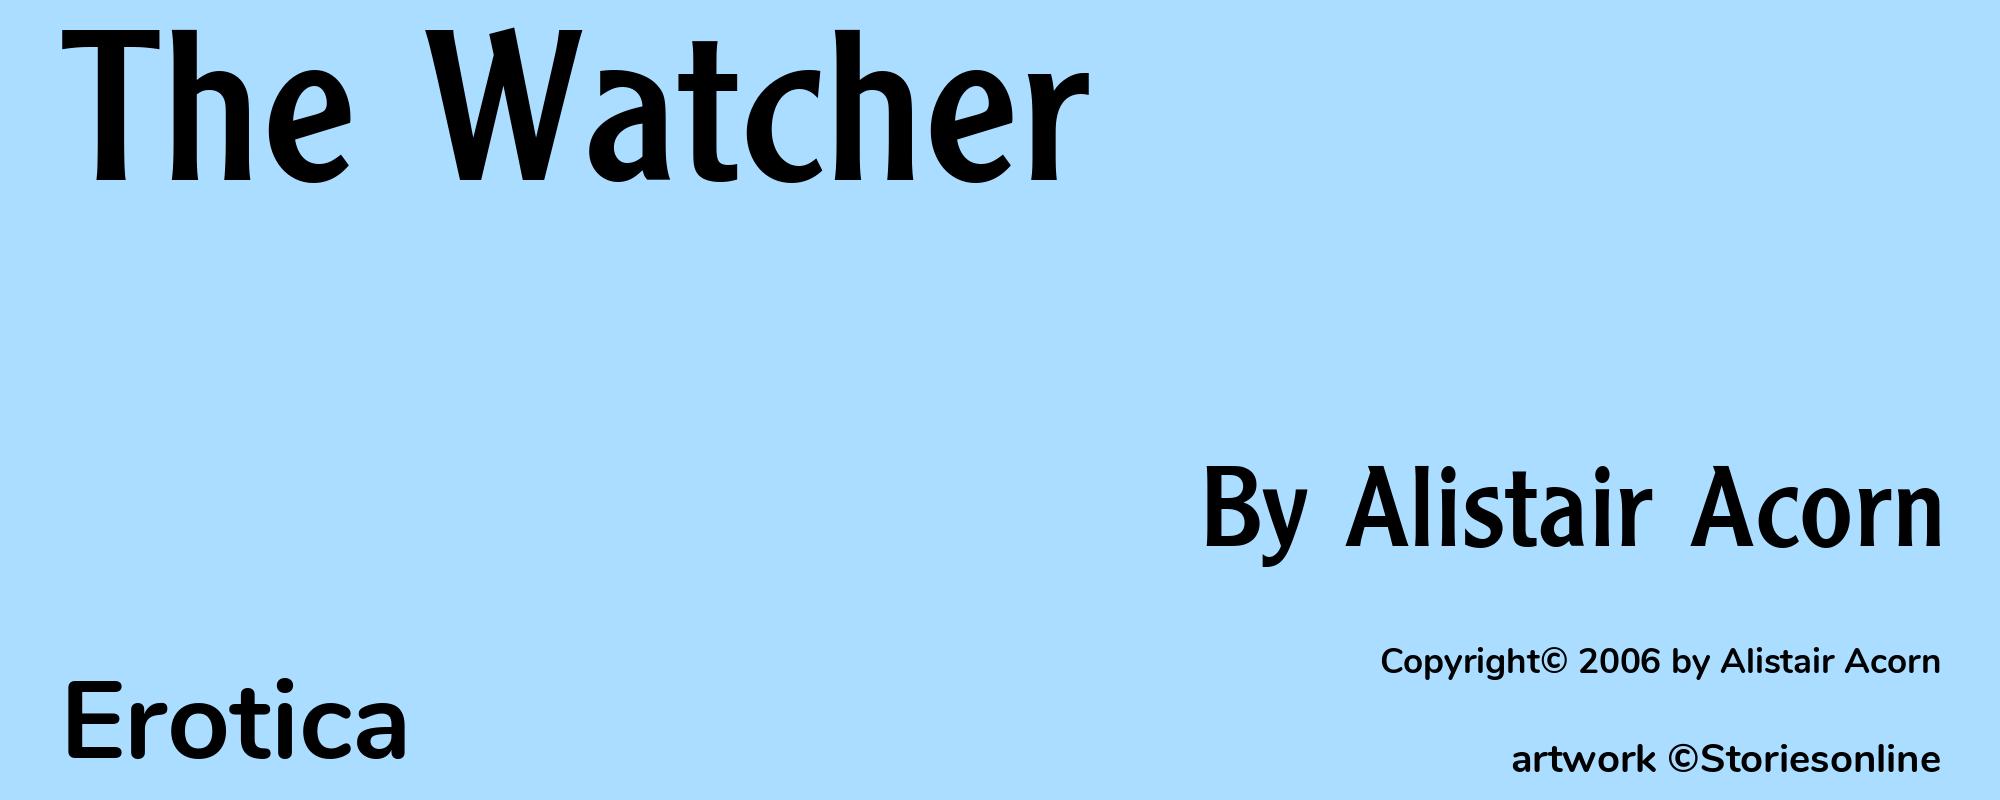 The Watcher - Cover